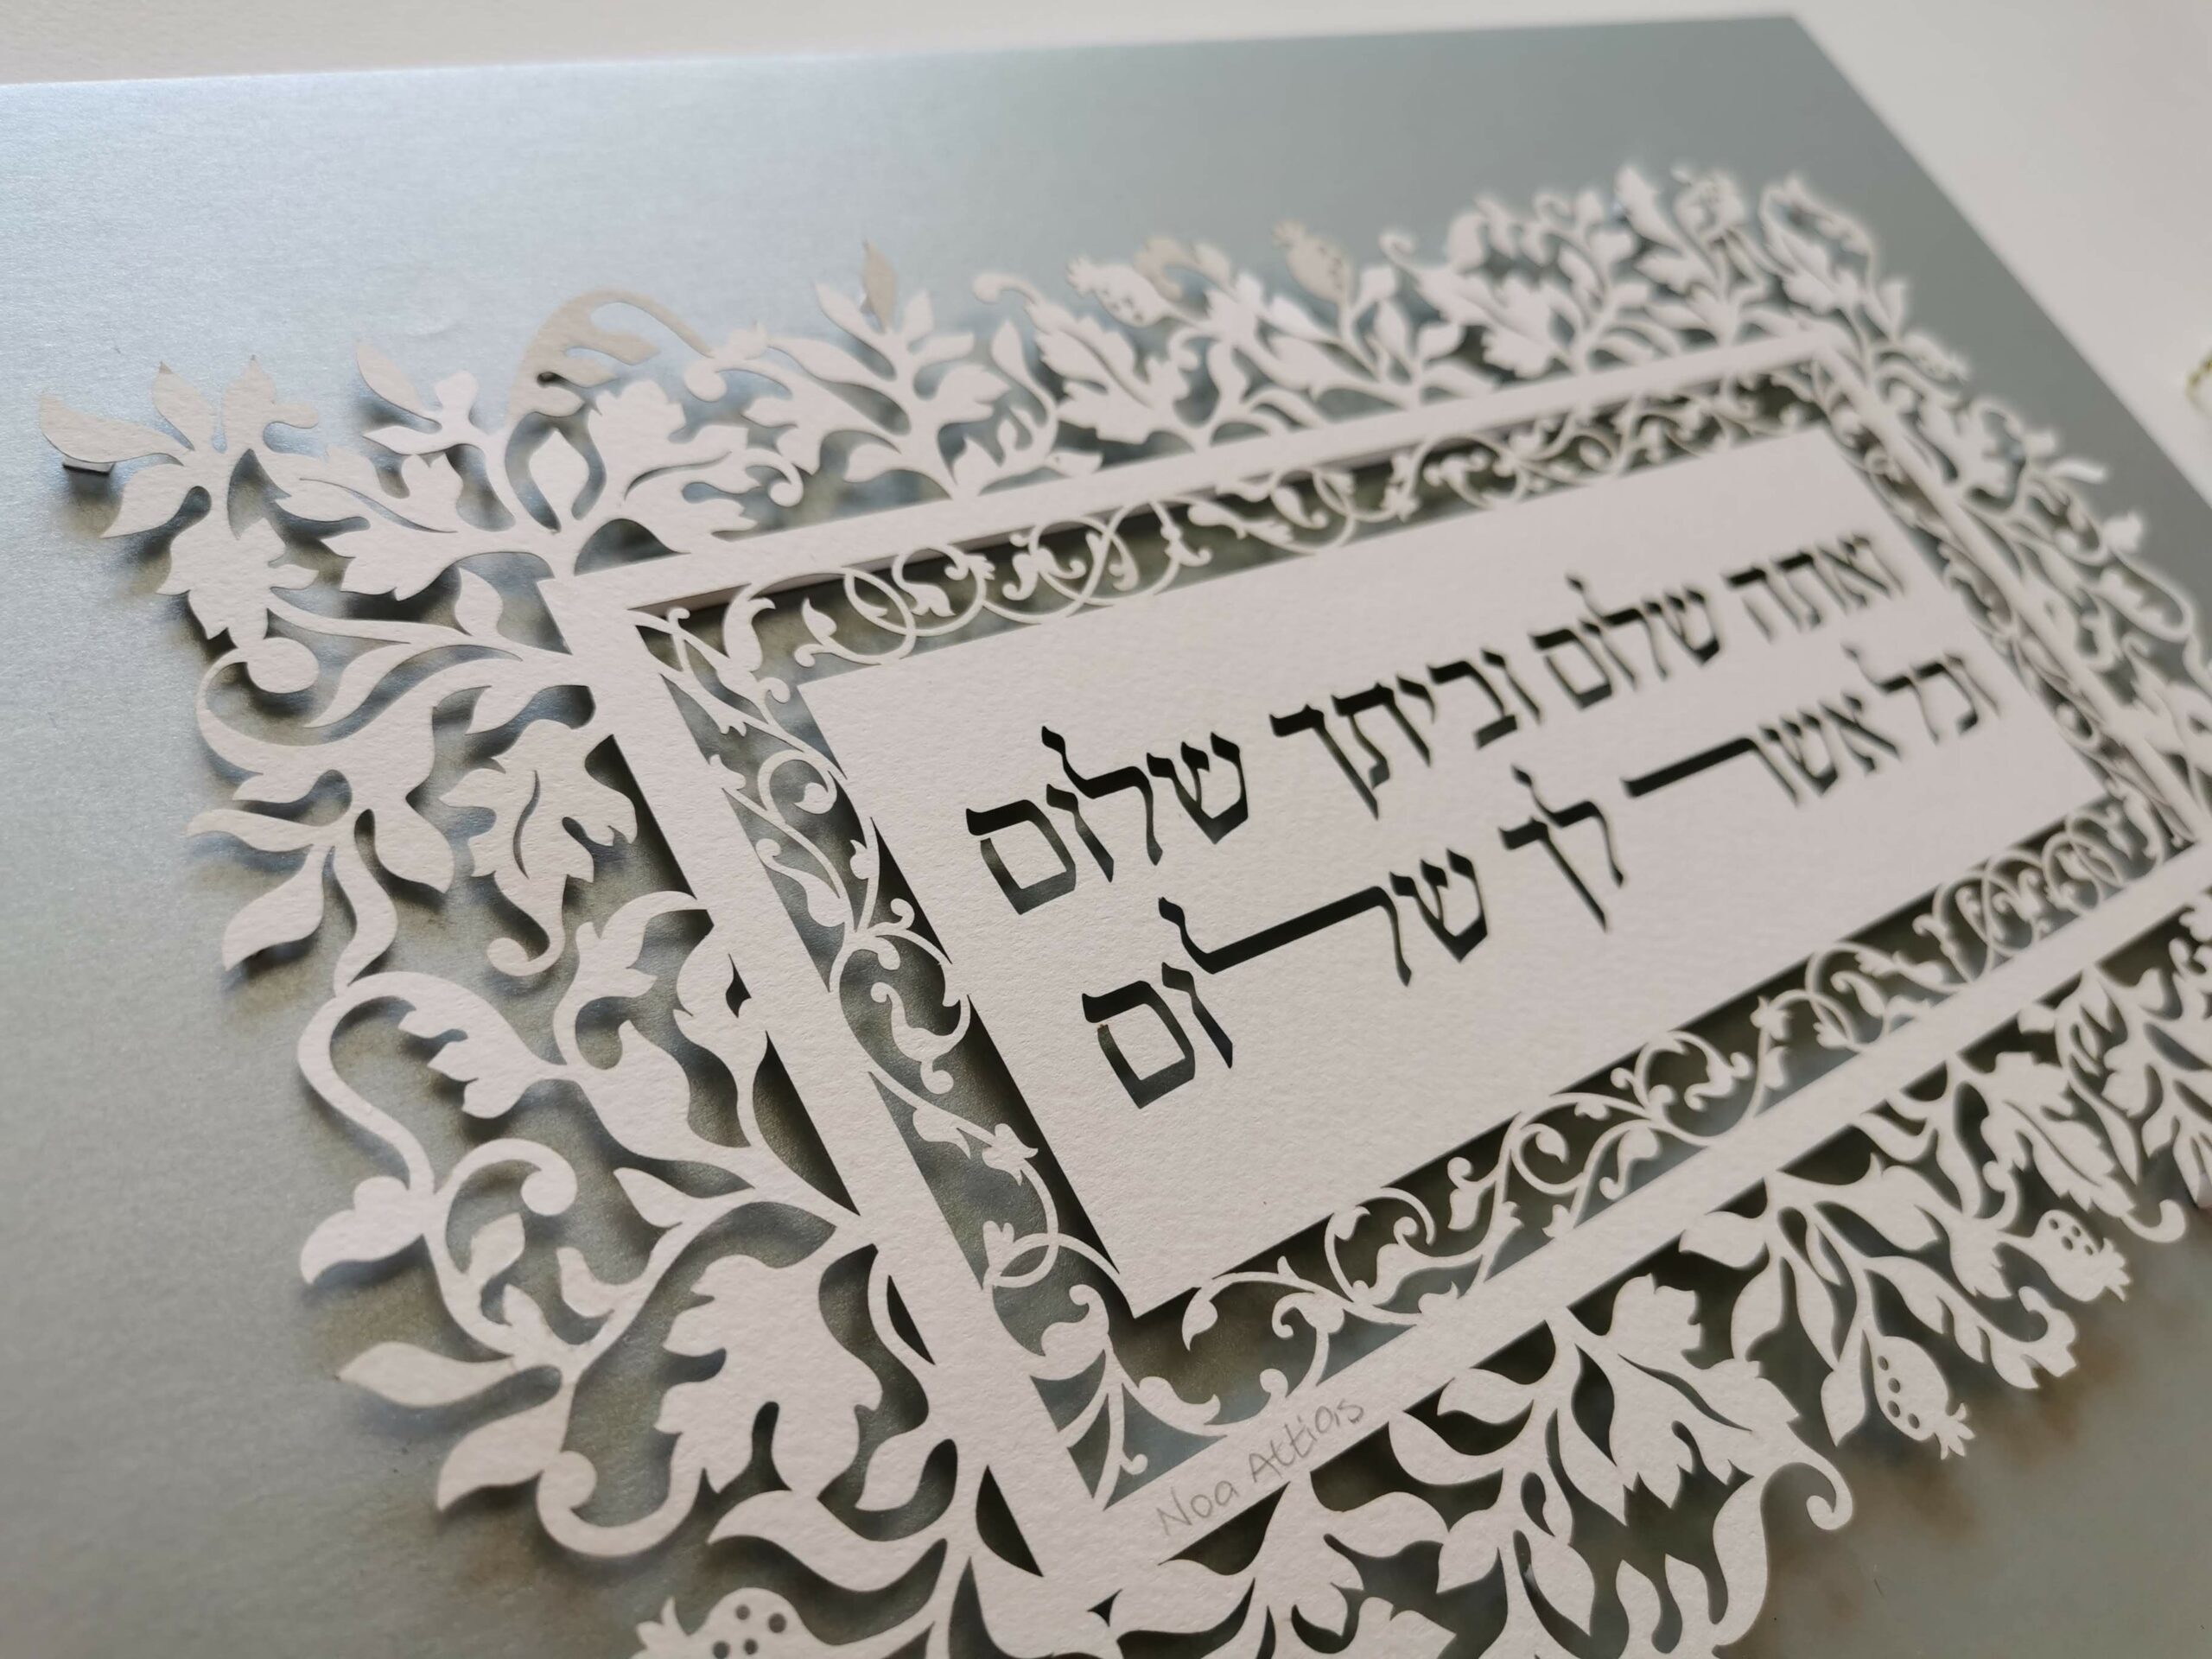 1. Image of a beautifully designed personalized papercut gift